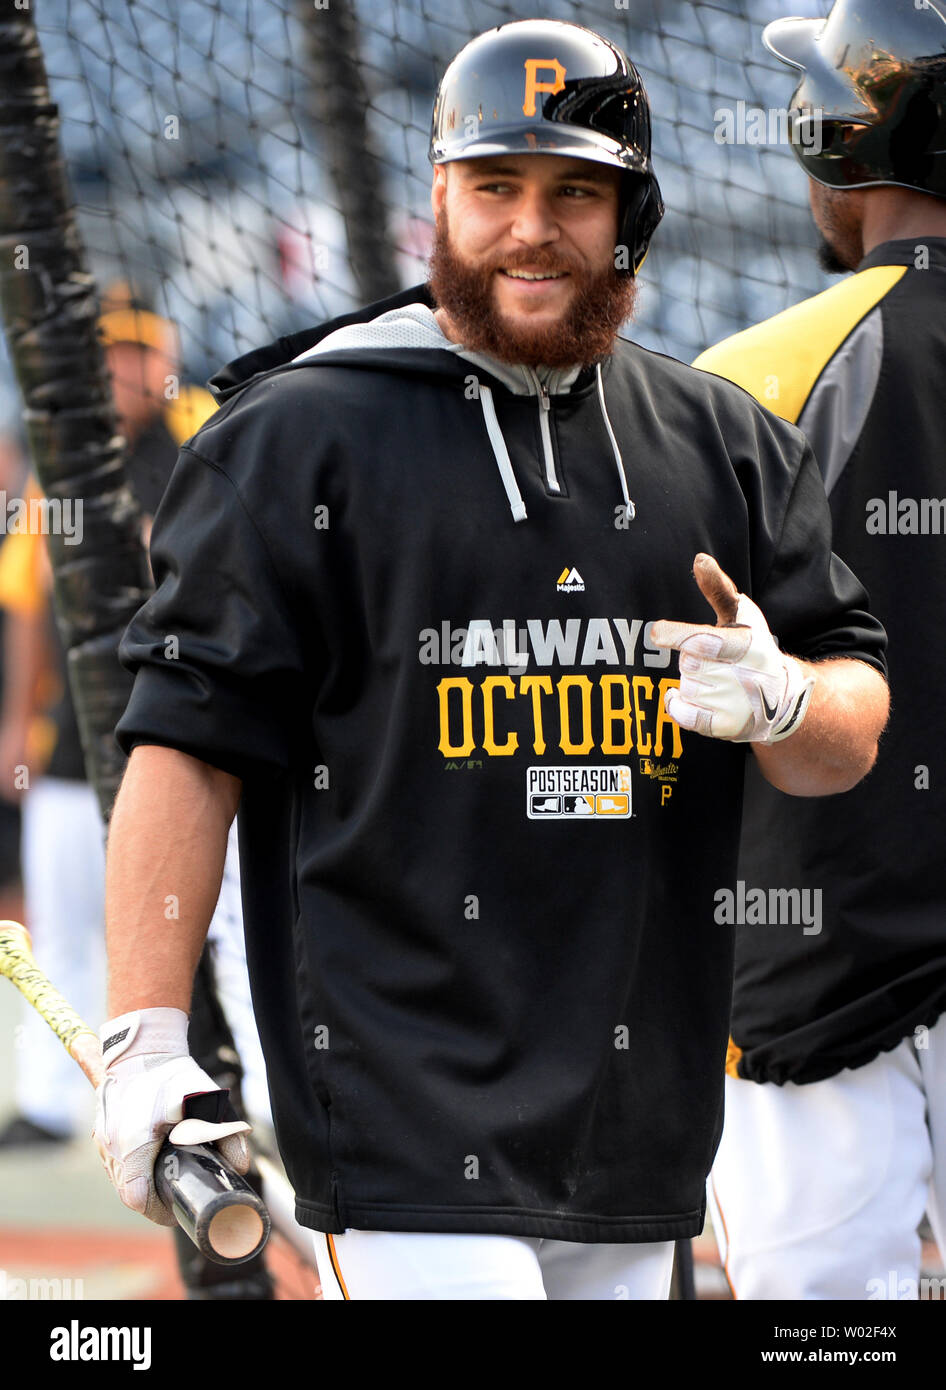 russell martin pirates